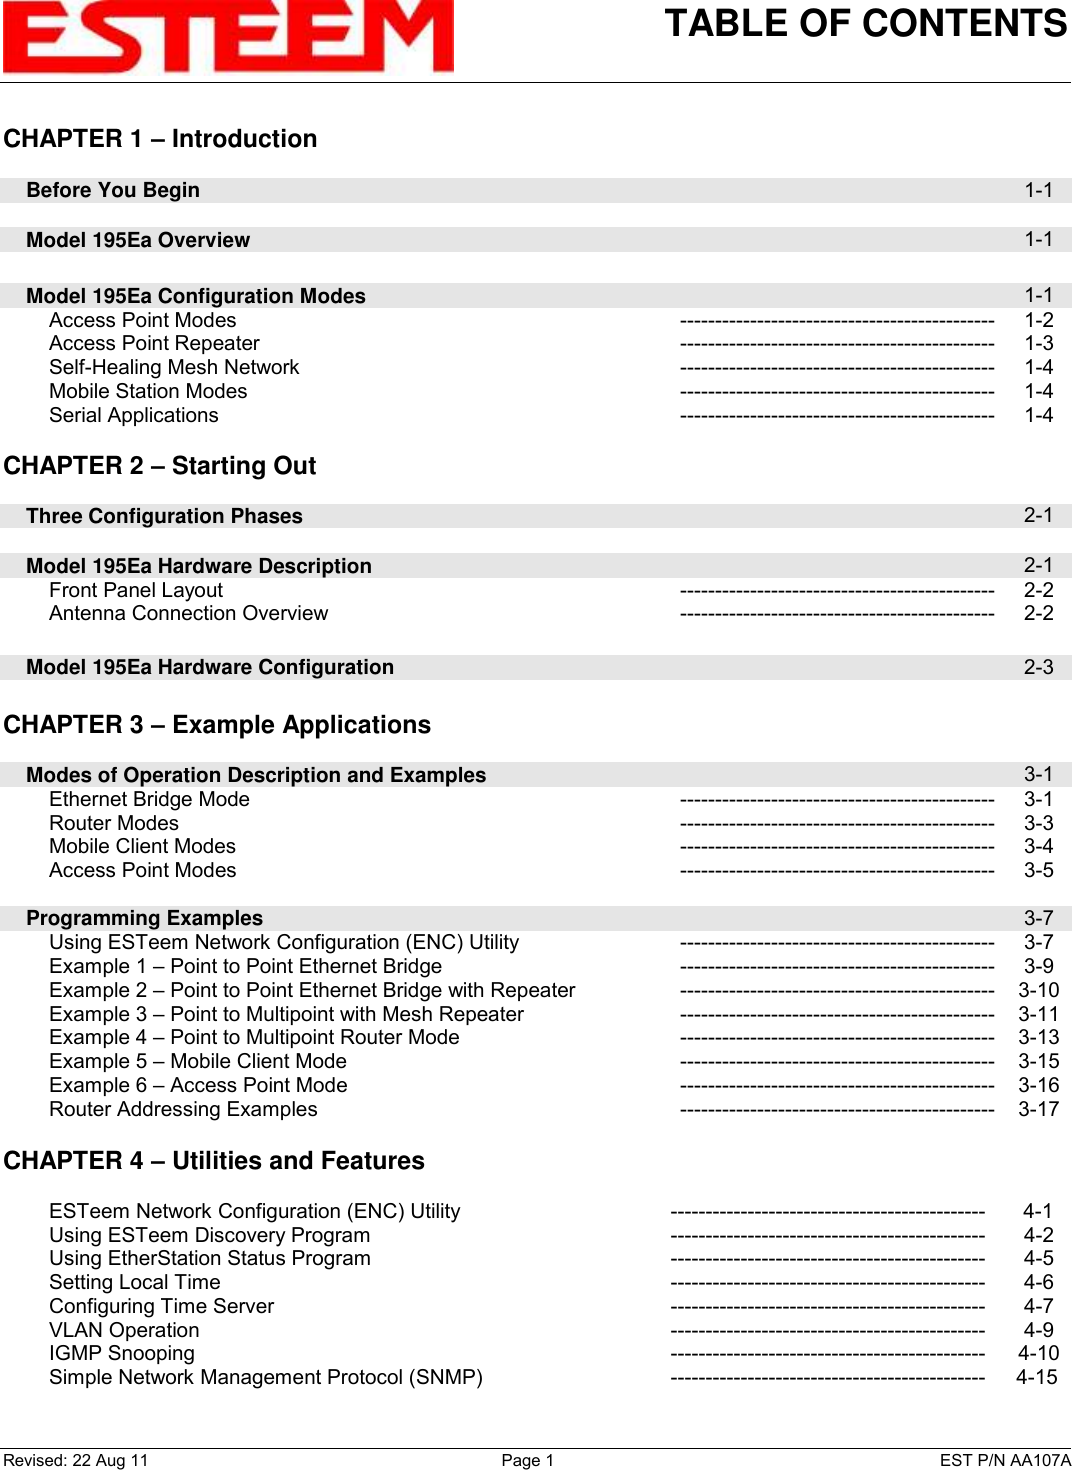 TABLE OF CONTENTS    Revised: 22 Aug 11  Page 1  EST P/N AA107A CHAPTER 1 – Introduction      Before You Begin  1-1      Model 195Ea Overview  1-1        Model 195Ea Configuration Modes  1-1         Access Point Modes --------------------------------------------- 1-2         Access Point Repeater --------------------------------------------- 1-3         Self-Healing Mesh Network --------------------------------------------- 1-4         Mobile Station Modes --------------------------------------------- 1-4         Serial Applications --------------------------------------------- 1-4    CHAPTER 2 – Starting Out          Three Configuration Phases  2-1        Model 195Ea Hardware Description  2-1         Front Panel Layout --------------------------------------------- 2-2         Antenna Connection Overview --------------------------------------------- 2-2        Model 195Ea Hardware Configuration  2-3    CHAPTER 3 – Example Applications          Modes of Operation Description and Examples  3-1         Ethernet Bridge Mode --------------------------------------------- 3-1         Router Modes --------------------------------------------- 3-3         Mobile Client Modes --------------------------------------------- 3-4         Access Point Modes --------------------------------------------- 3-5        Programming Examples  3-7         Using ESTeem Network Configuration (ENC) Utility --------------------------------------------- 3-7         Example 1 – Point to Point Ethernet Bridge --------------------------------------------- 3-9         Example 2 – Point to Point Ethernet Bridge with Repeater --------------------------------------------- 3-10         Example 3 – Point to Multipoint with Mesh Repeater --------------------------------------------- 3-11         Example 4 – Point to Multipoint Router Mode --------------------------------------------- 3-13         Example 5 – Mobile Client Mode --------------------------------------------- 3-15         Example 6 – Access Point Mode --------------------------------------------- 3-16         Router Addressing Examples  --------------------------------------------- 3-17   CHAPTER 4 – Utilities and Features             ESTeem Network Configuration (ENC) Utility ---------------------------------------------  4-1         Using ESTeem Discovery Program --------------------------------------------- 4-2         Using EtherStation Status Program --------------------------------------------- 4-5         Setting Local Time --------------------------------------------- 4-6         Configuring Time Server --------------------------------------------- 4-7         VLAN Operation --------------------------------------------- 4-9         IGMP Snooping --------------------------------------------- 4-10         Simple Network Management Protocol (SNMP) ---------------------------------------------  4-15    